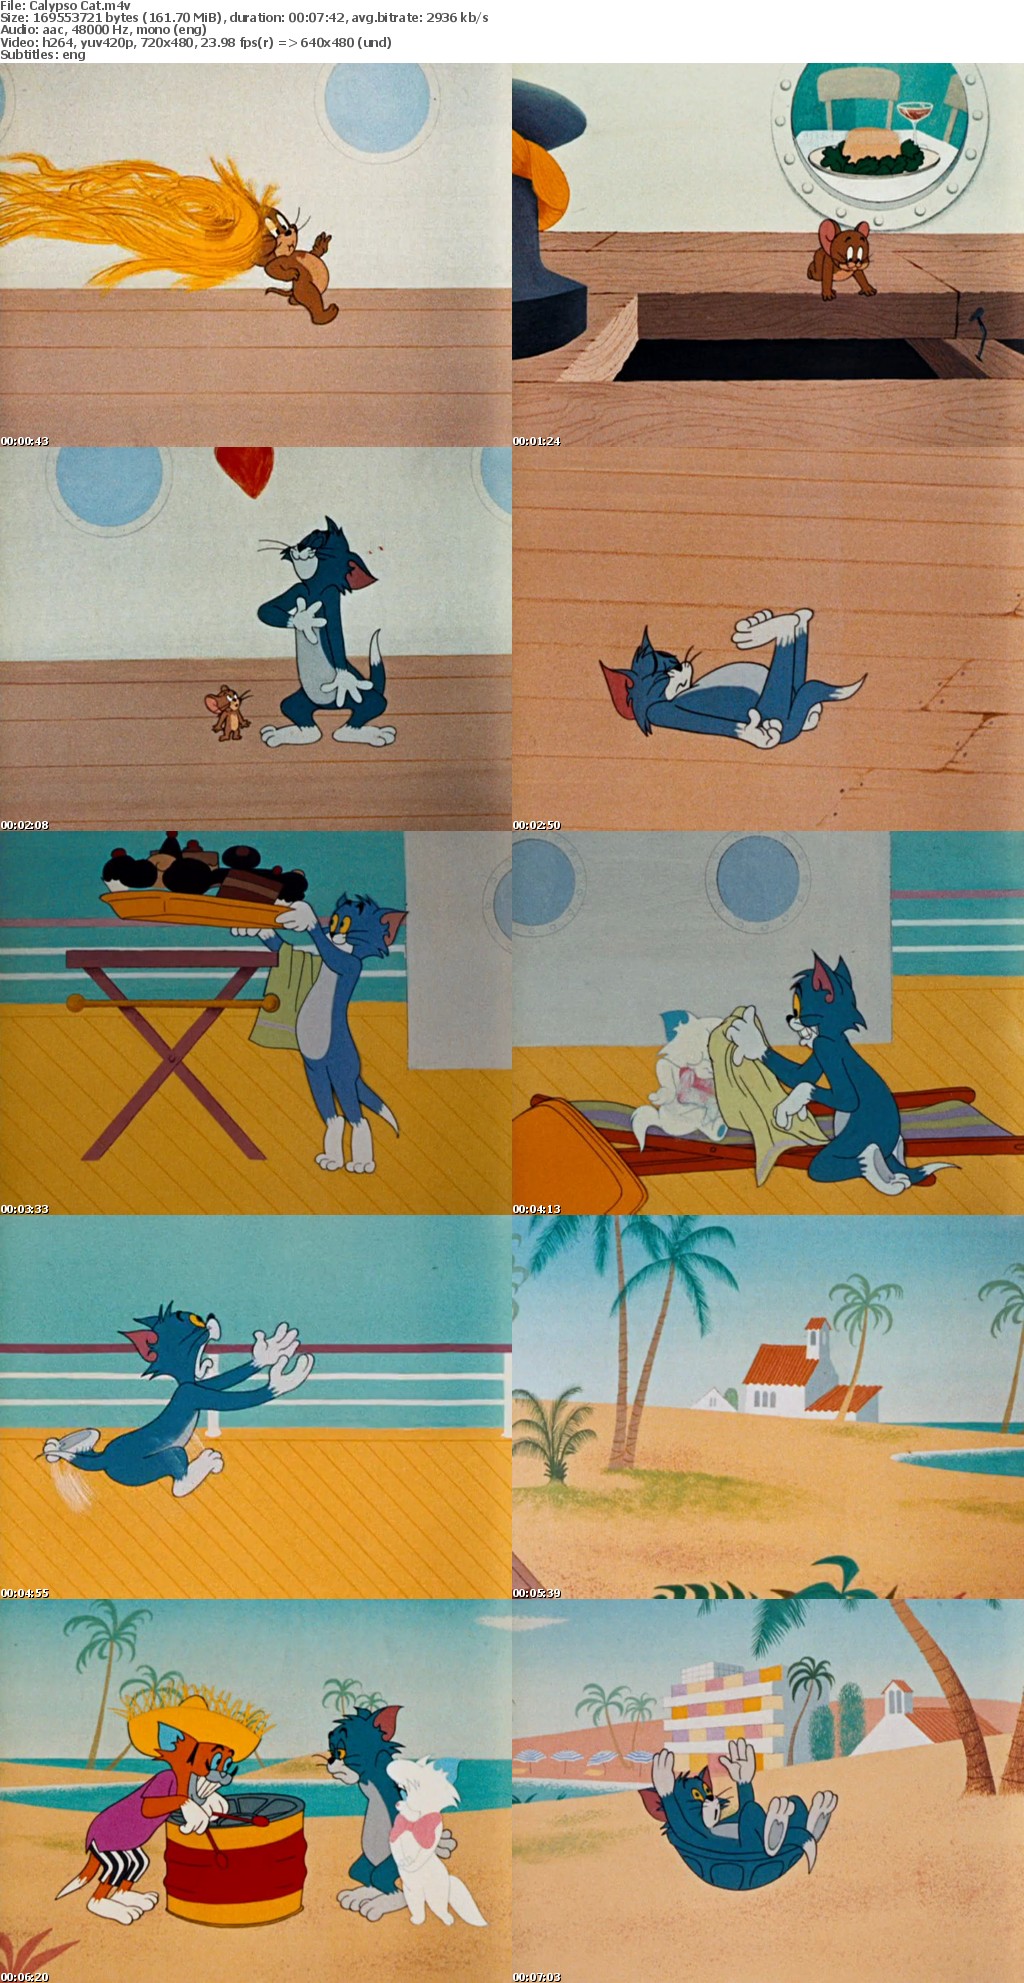 Tom and Jerry - The Gene Deitch Collection (13 cartoons) 480p x264 schuylang